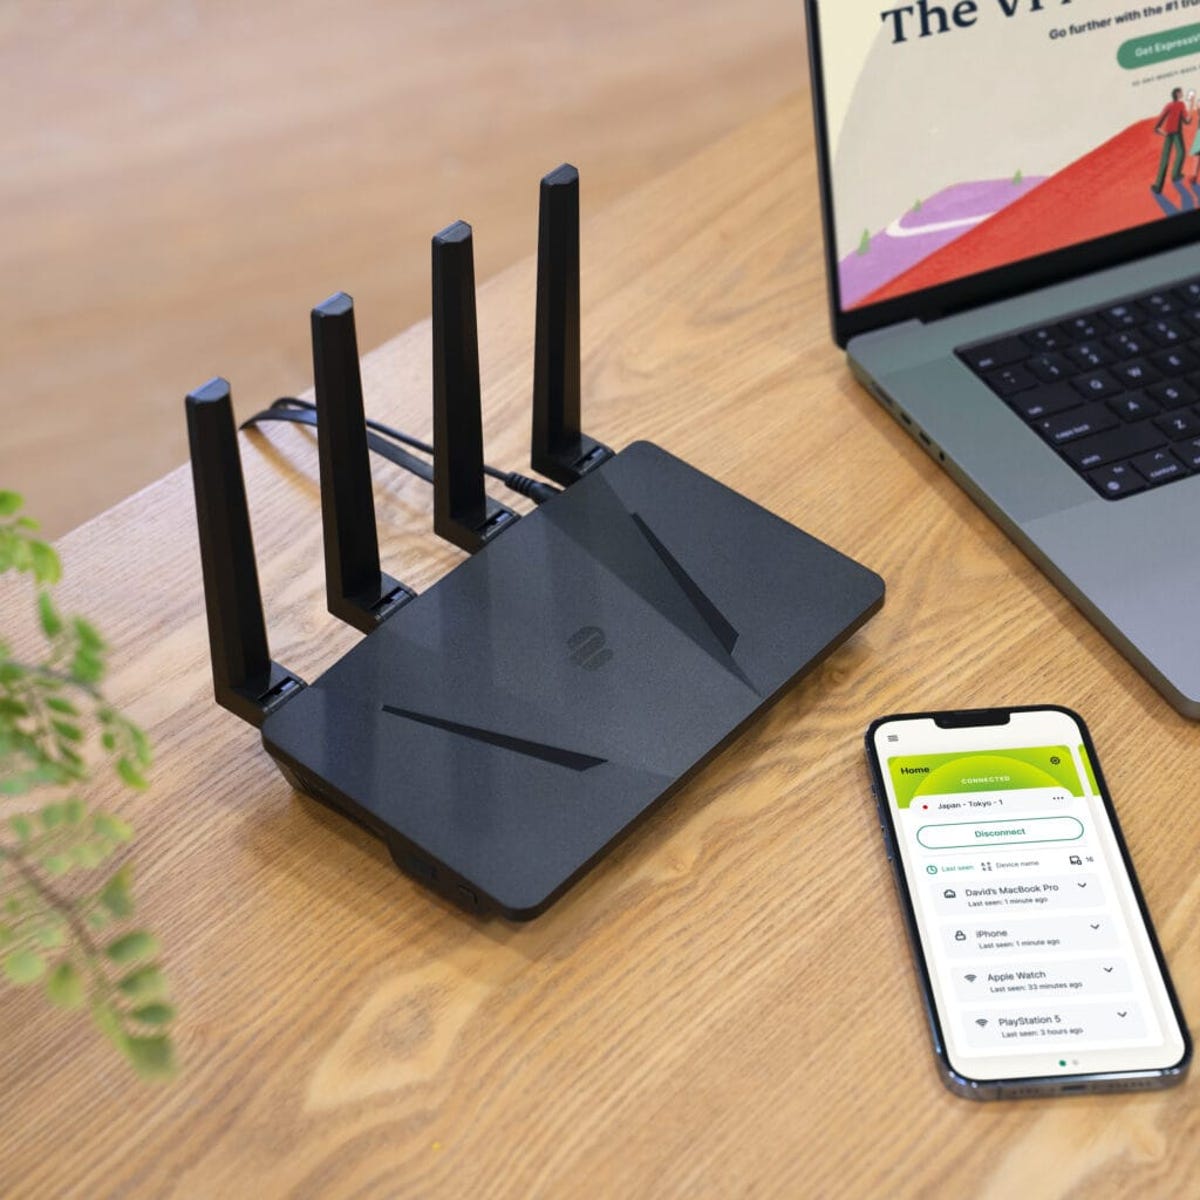 Do any routers have built-in VPN?